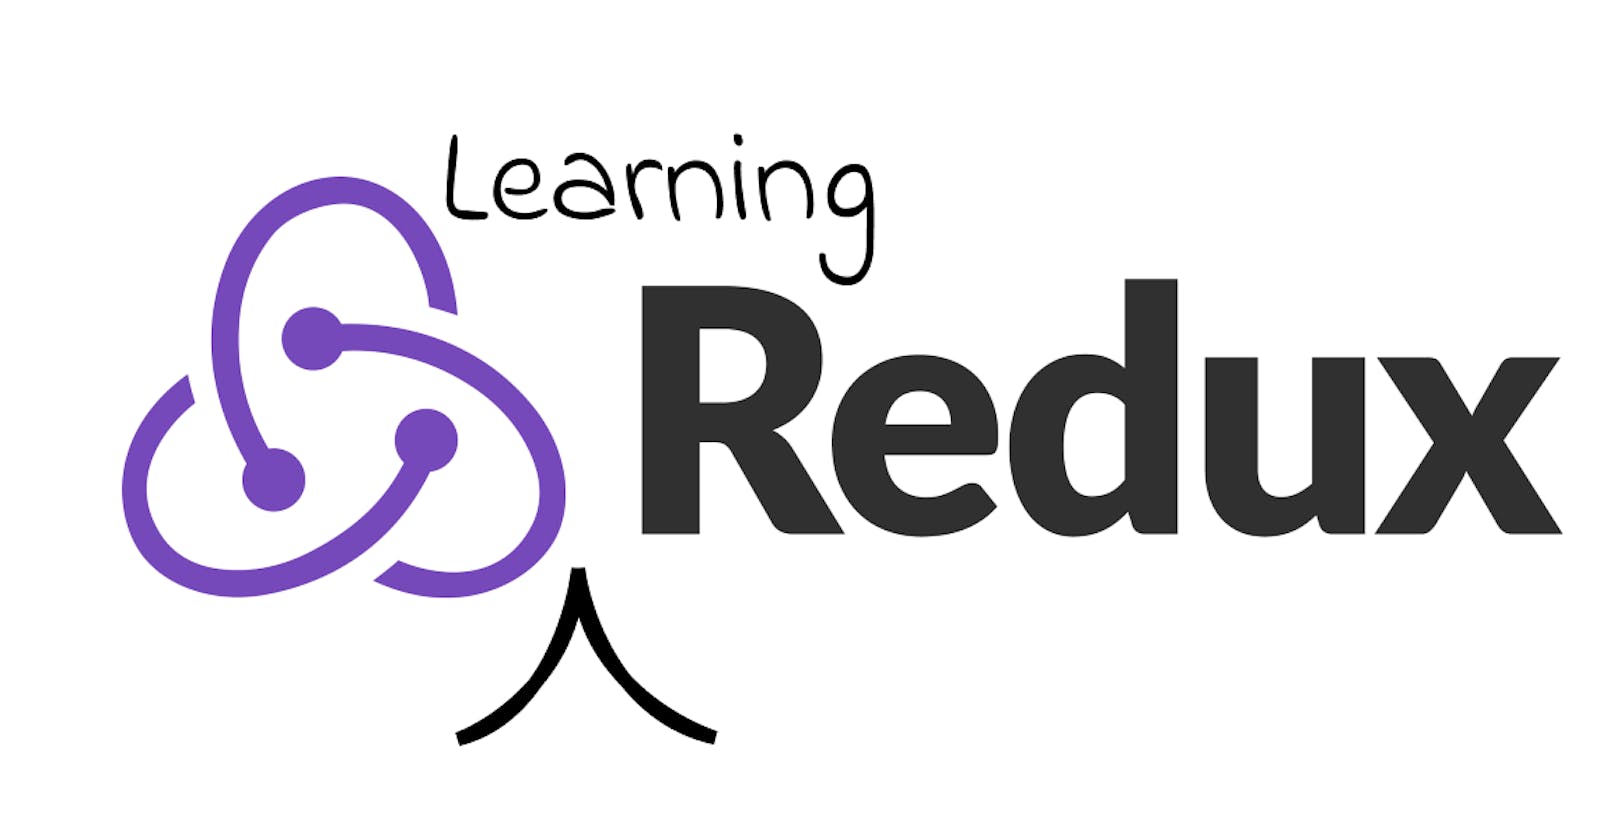 How I learned Redux  - An ultimate guide series for a beginner